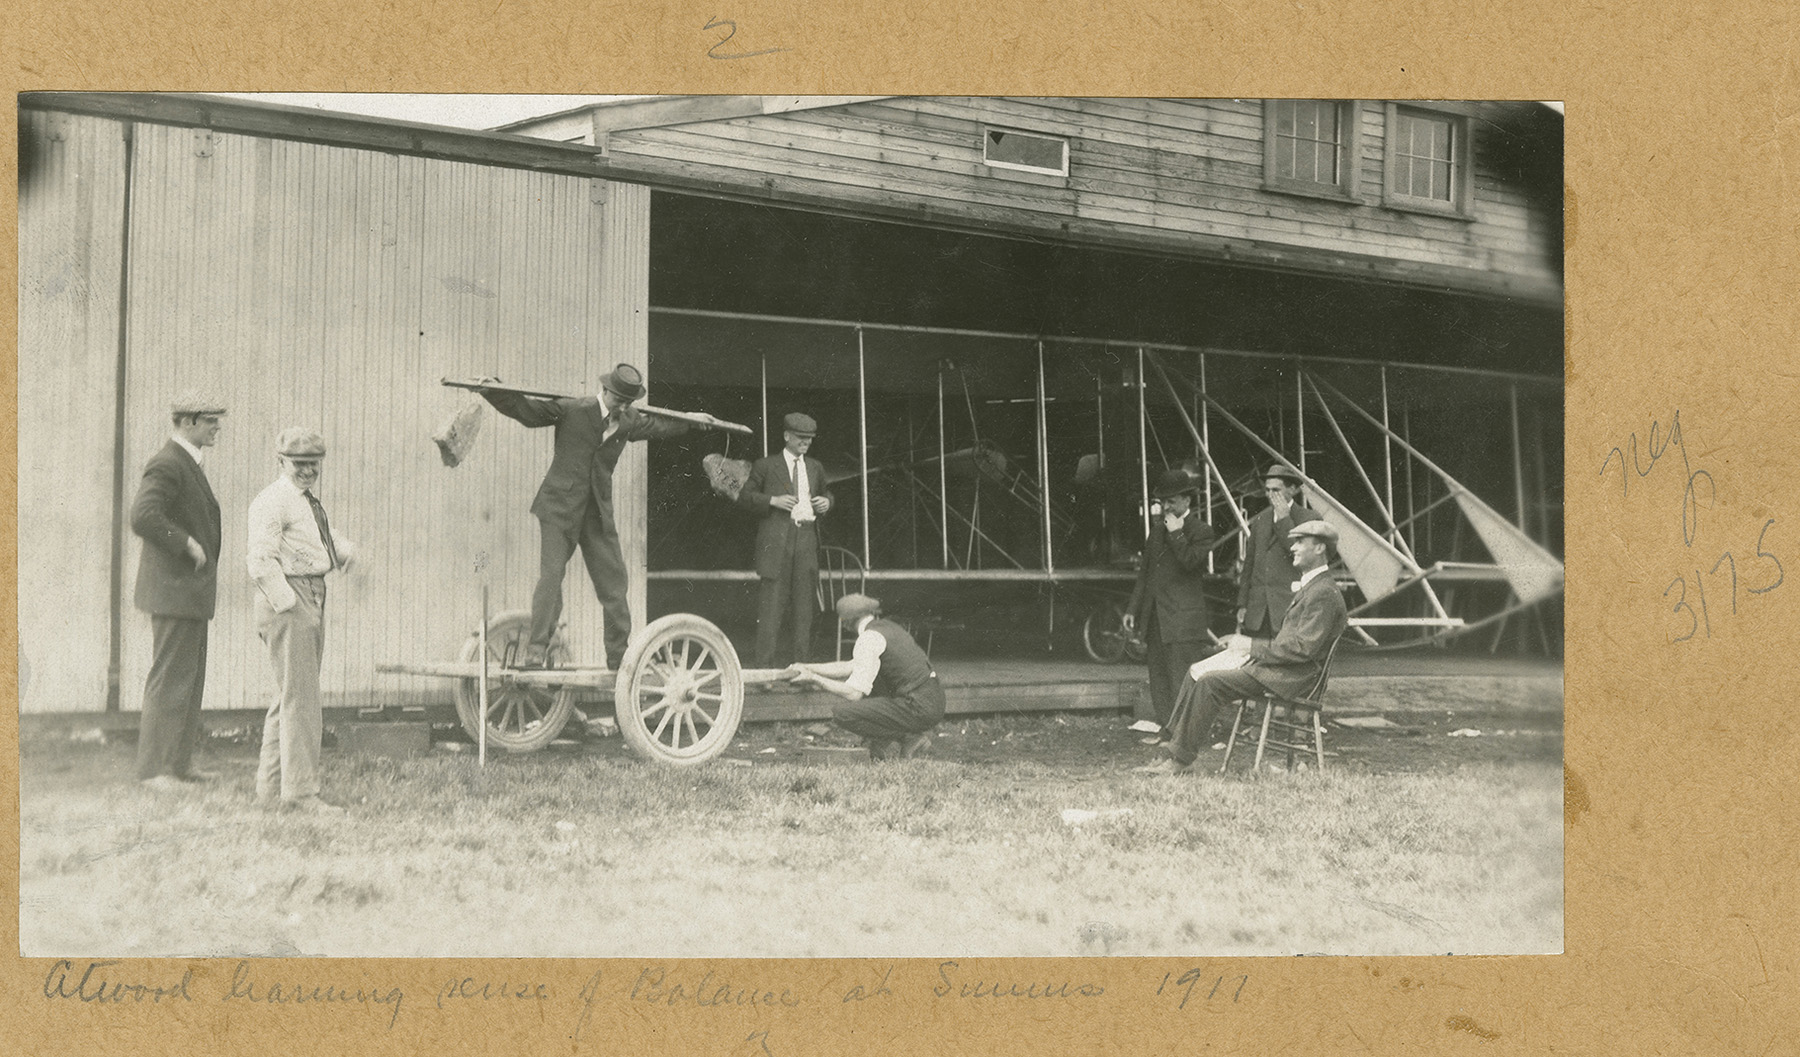 Atwood learning sense of balance at Simms (Station), 1911 (from MS-216)